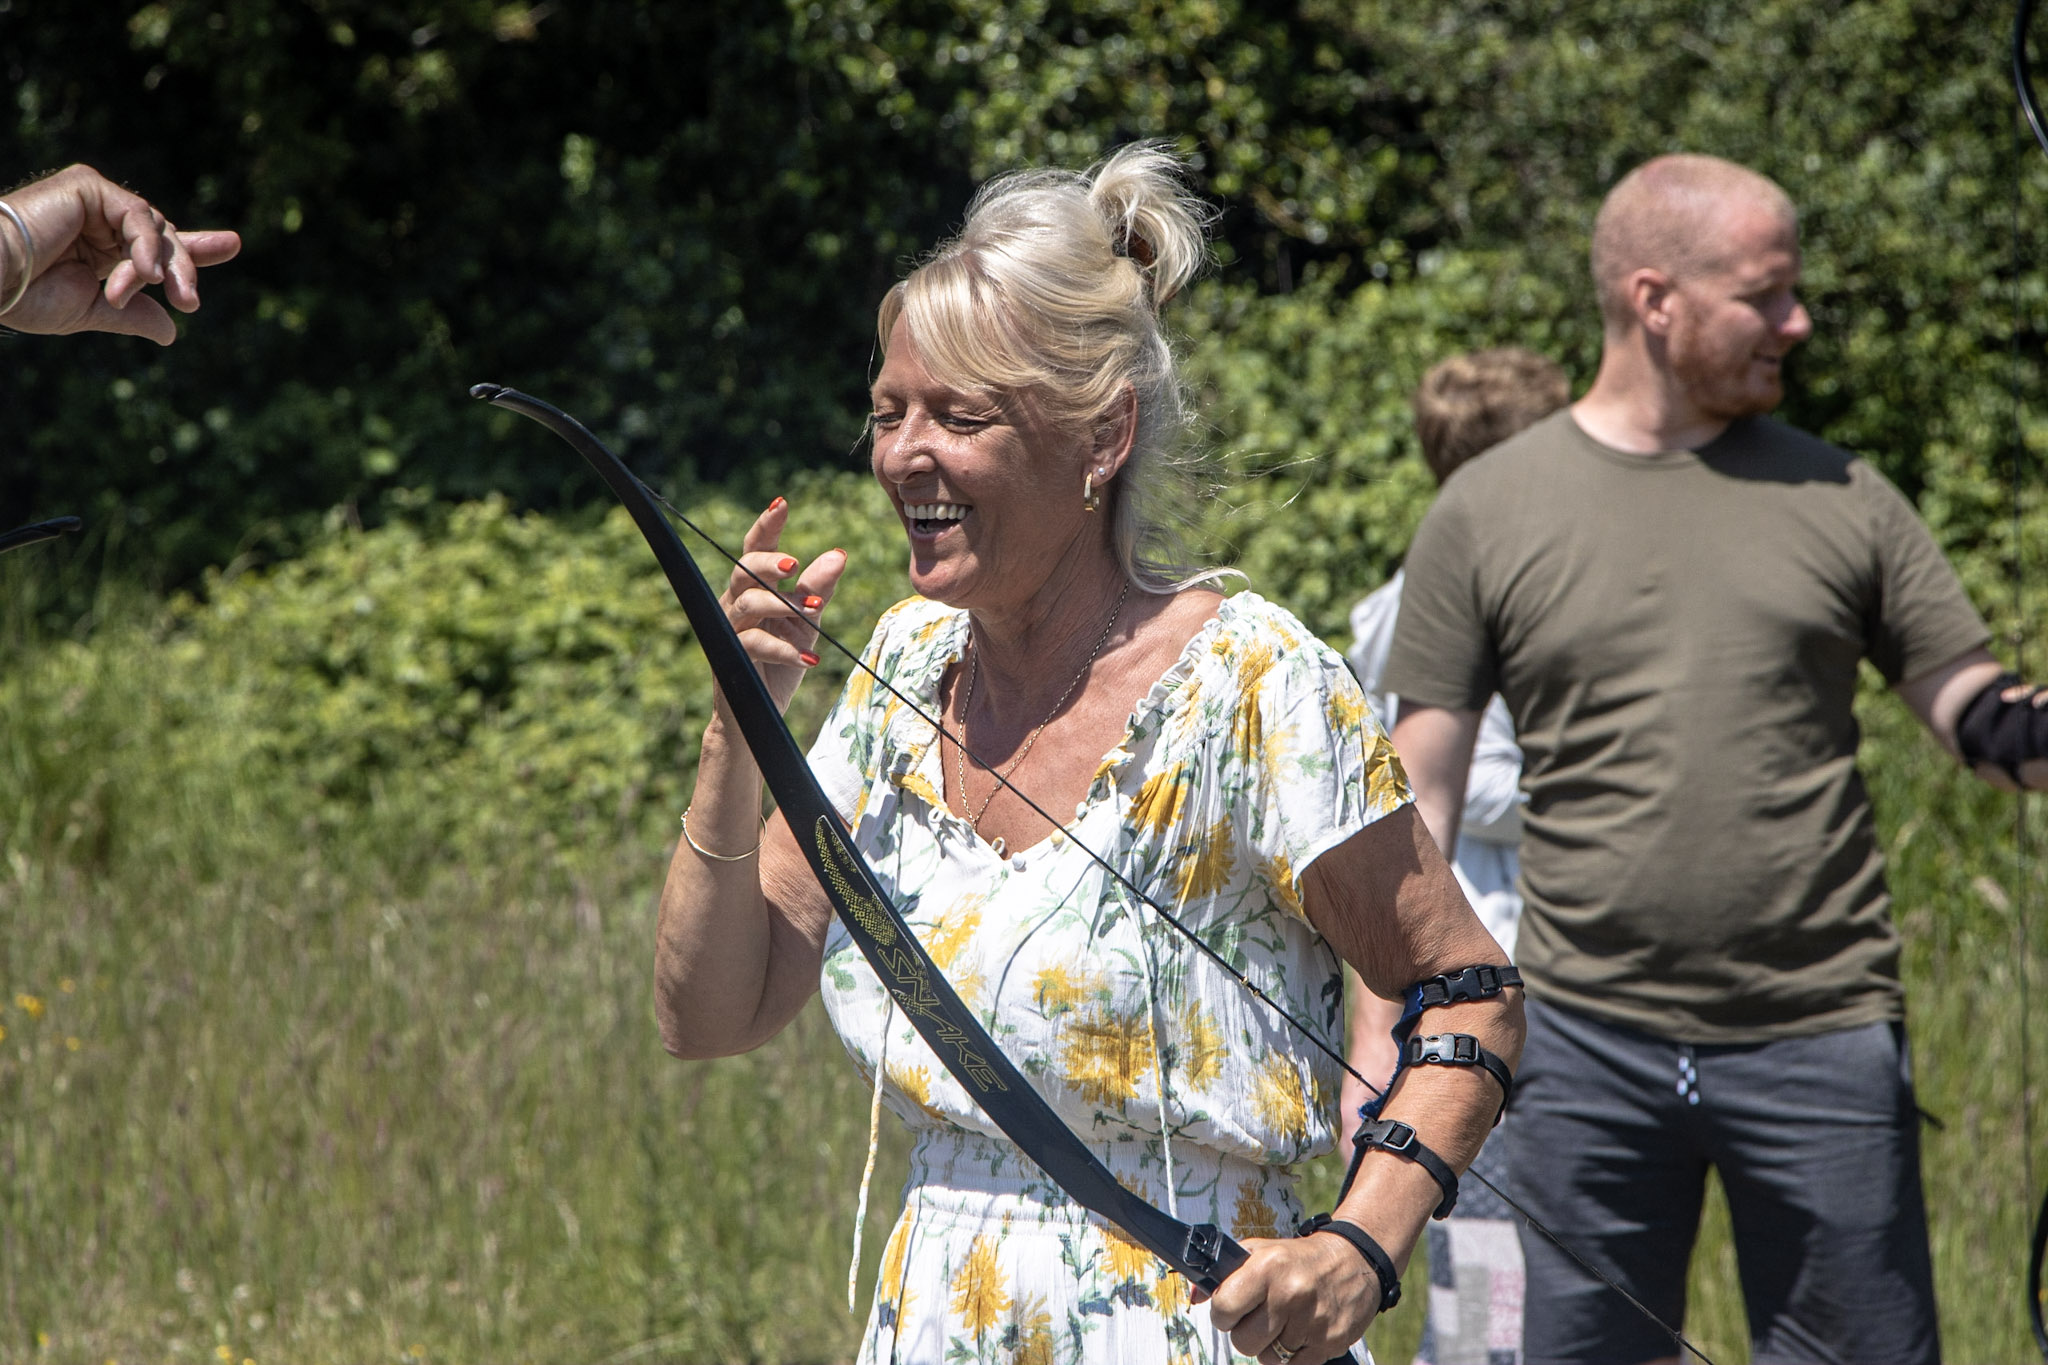 A woman playing Archery after looking for fun activities for adults in The New Forest.